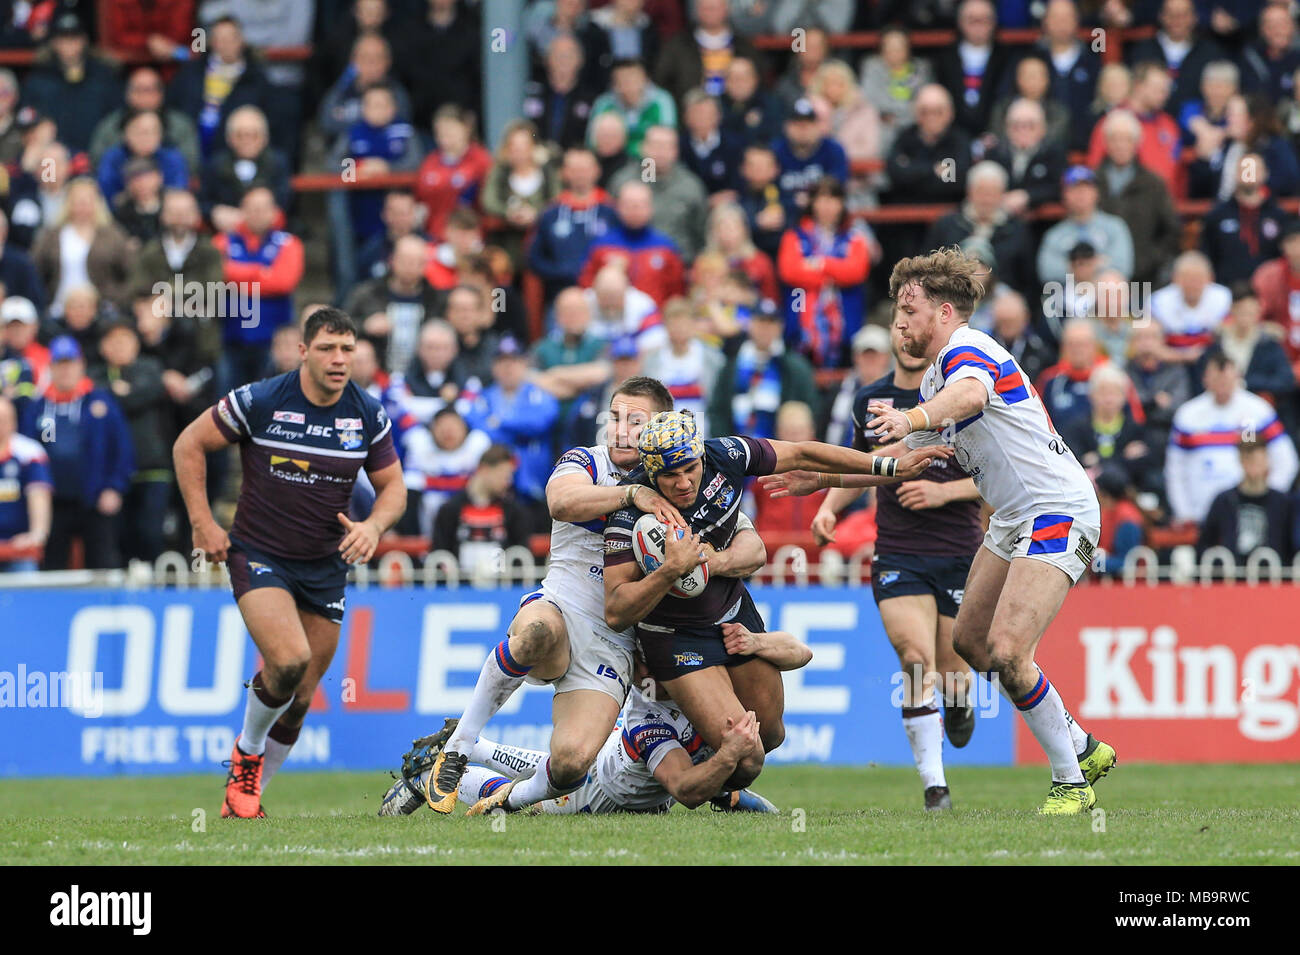 Wakefield, UK. 8th April 2018, Beaumont Legal Stadium, Wakefield, England; Betfred Super League rugby, Wakefield Trinity v Leeds Rhinos; Ashton Golding of Leeds Rhinos is tackled by Tyler Randell of Wakefield Trinity Credit: News Images/Alamy Live News Stock Photo